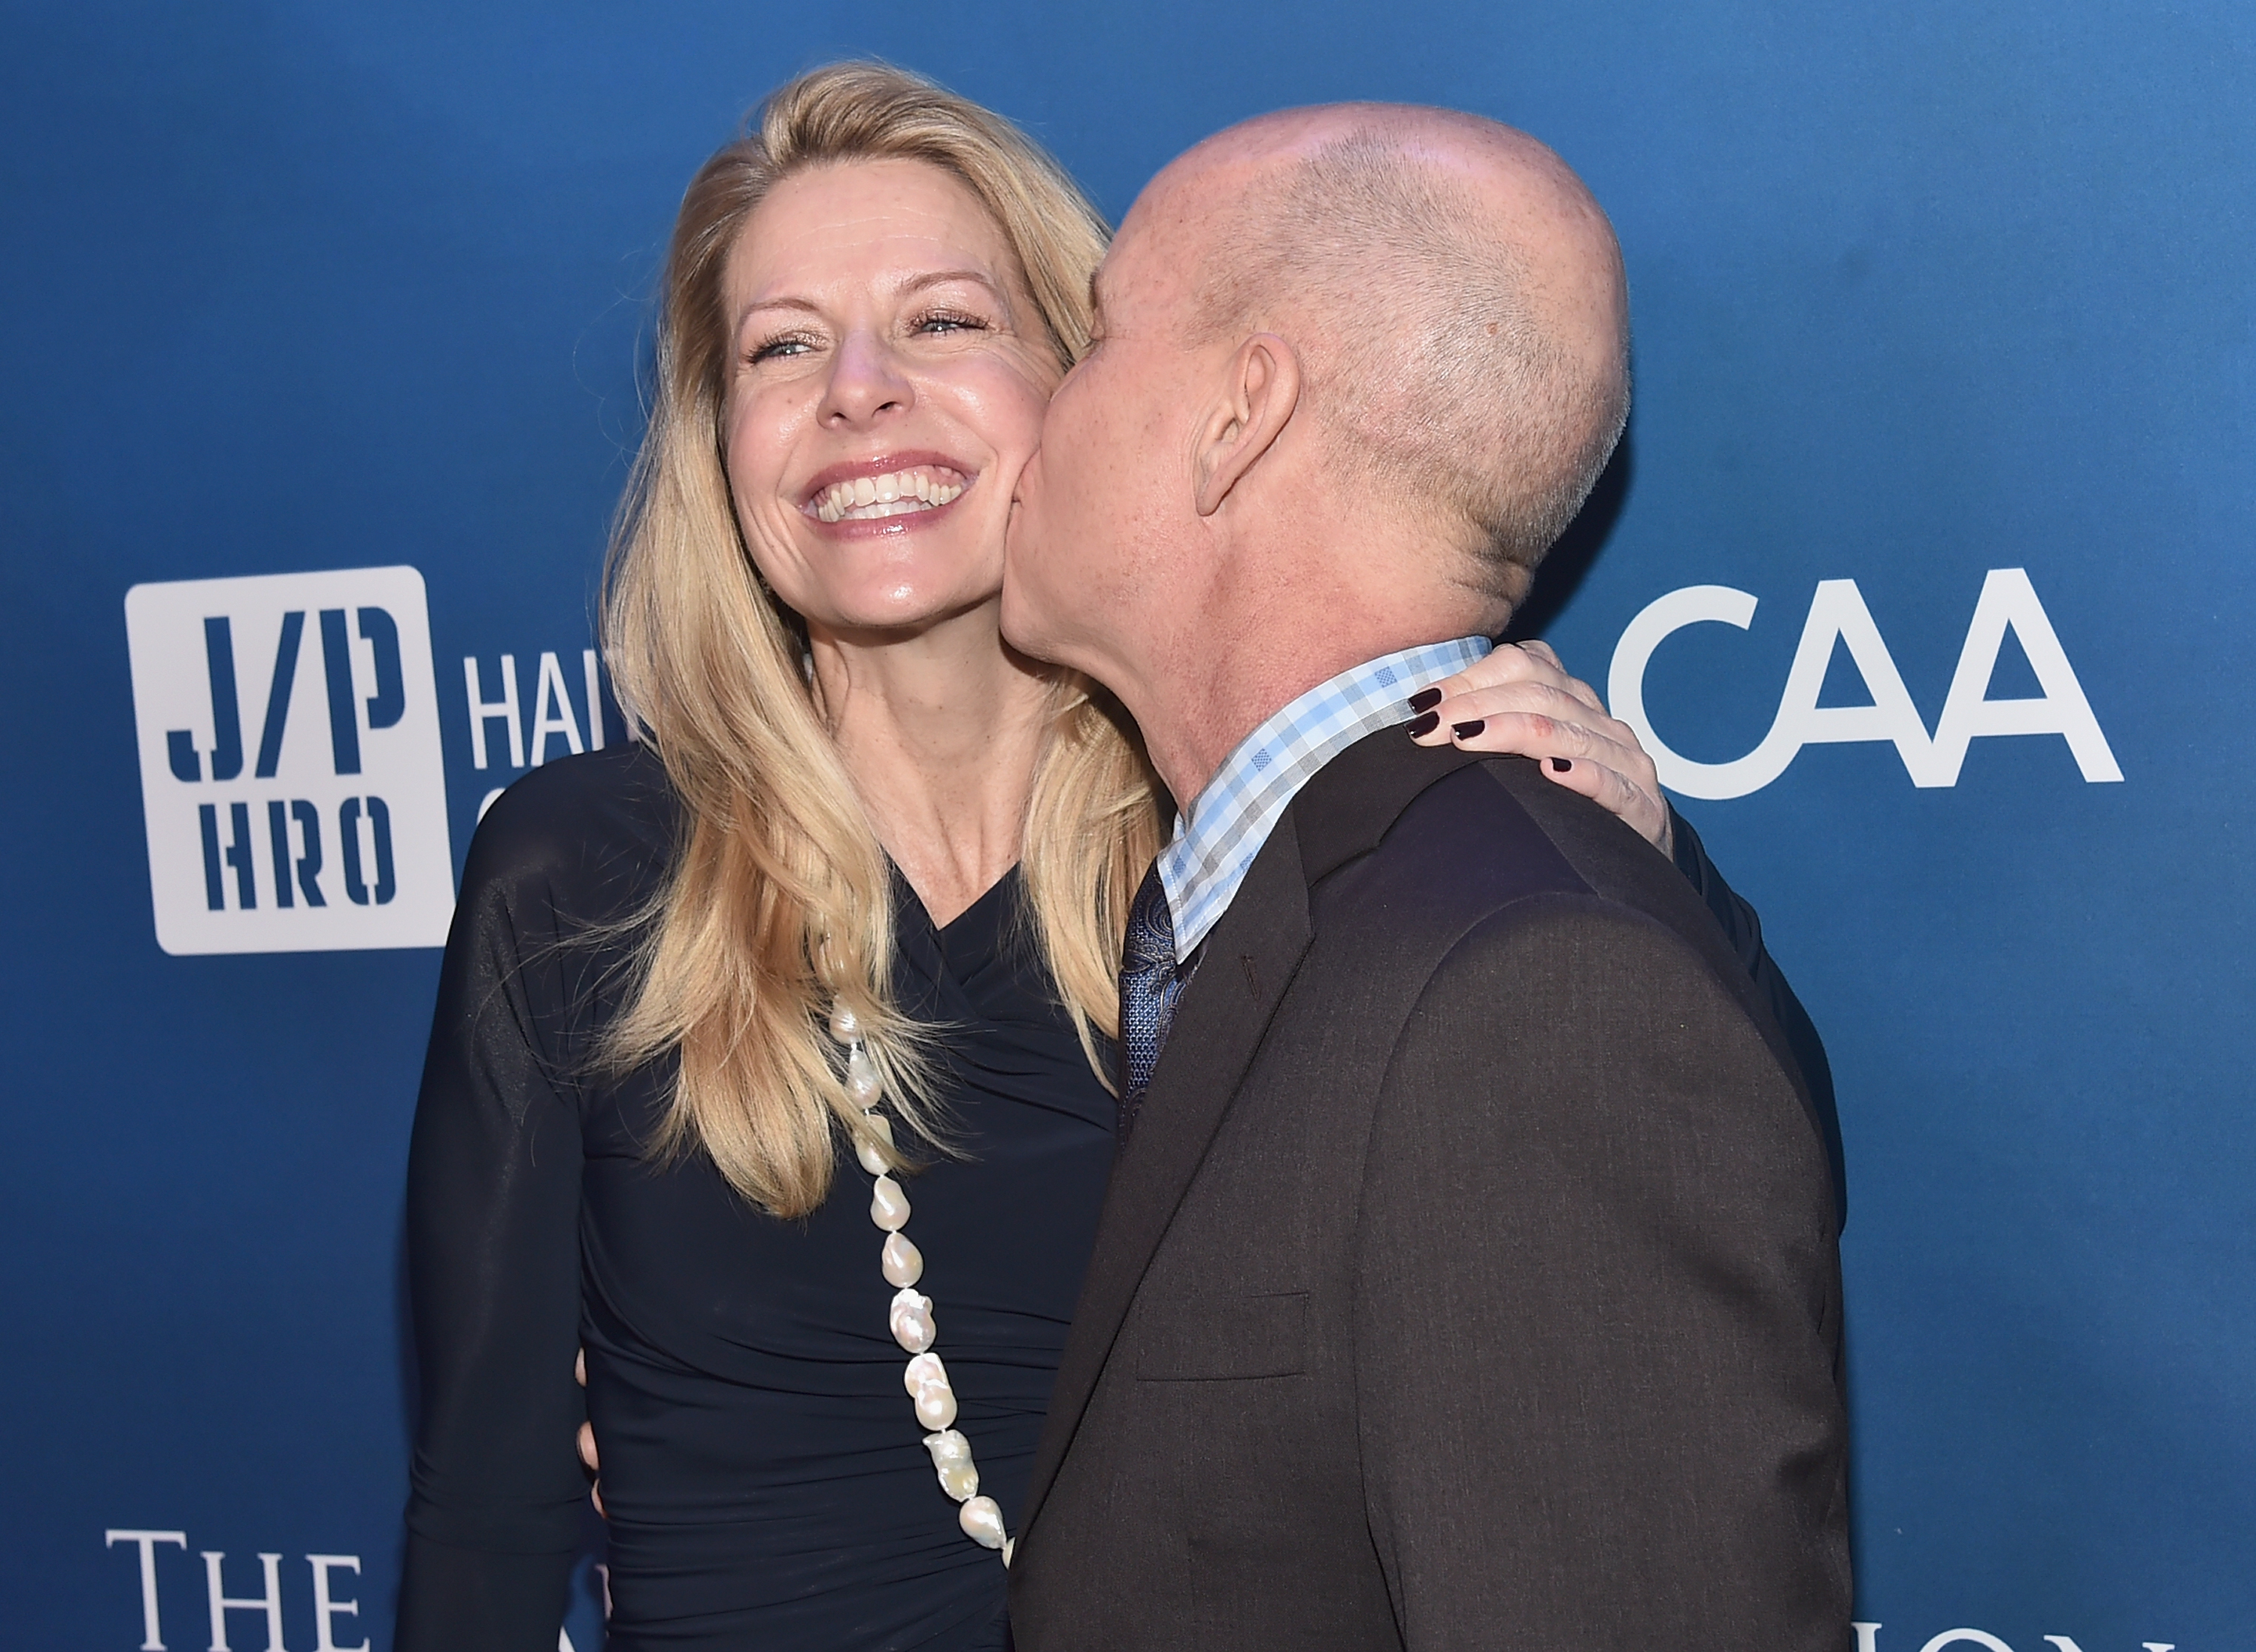 Tracie Hamilton and Olympian Scott Hamilton attend the 5th Annual Sean Penn & Friends HELP HAITI HOME Gala Benefiting J/P Haitian Relief Organization on January 9, 2016 in Beverly Hills, California | Source: Getty Images